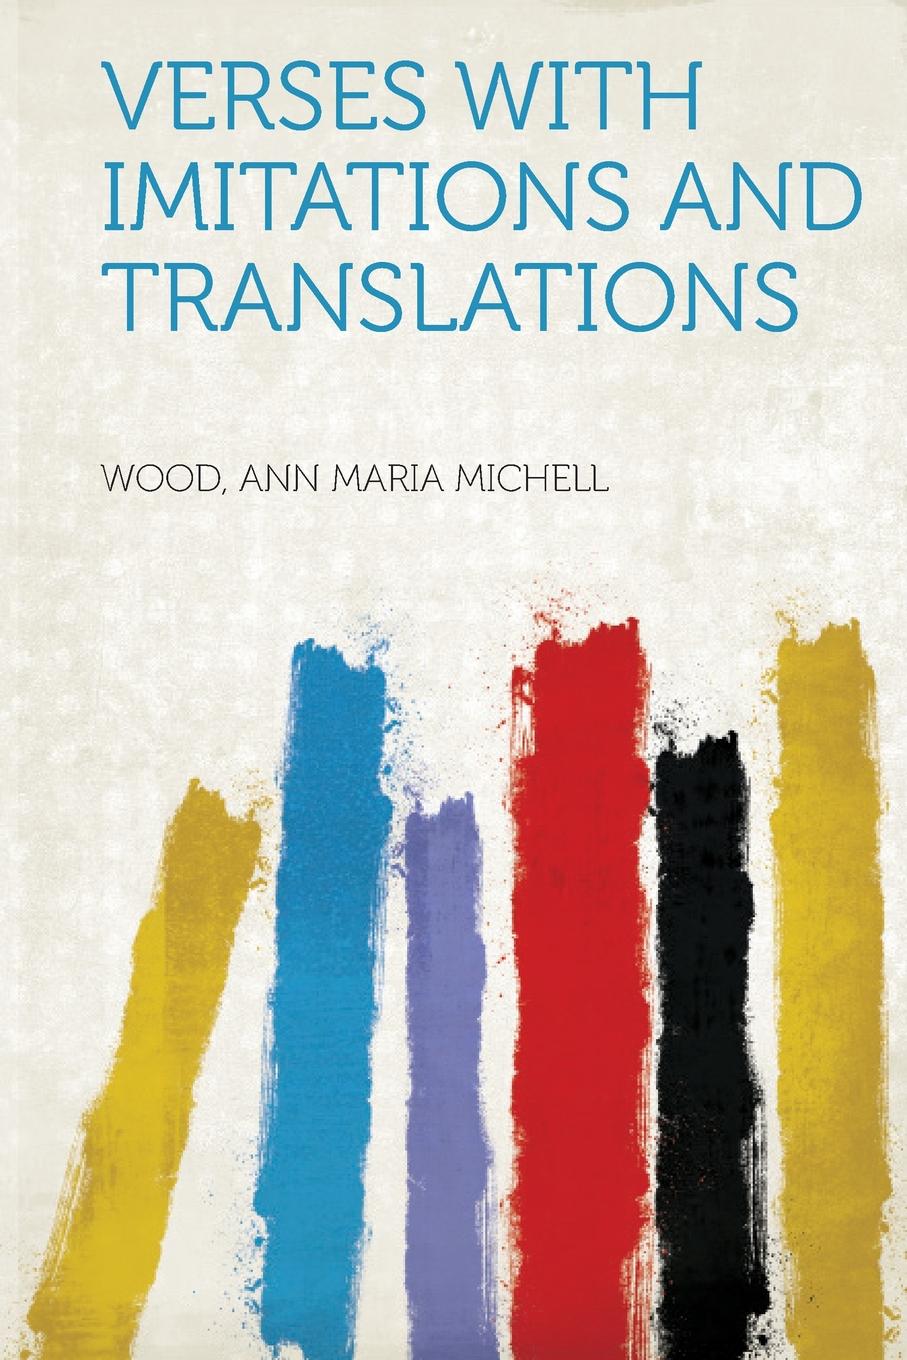 Verses with Imitations and Translations